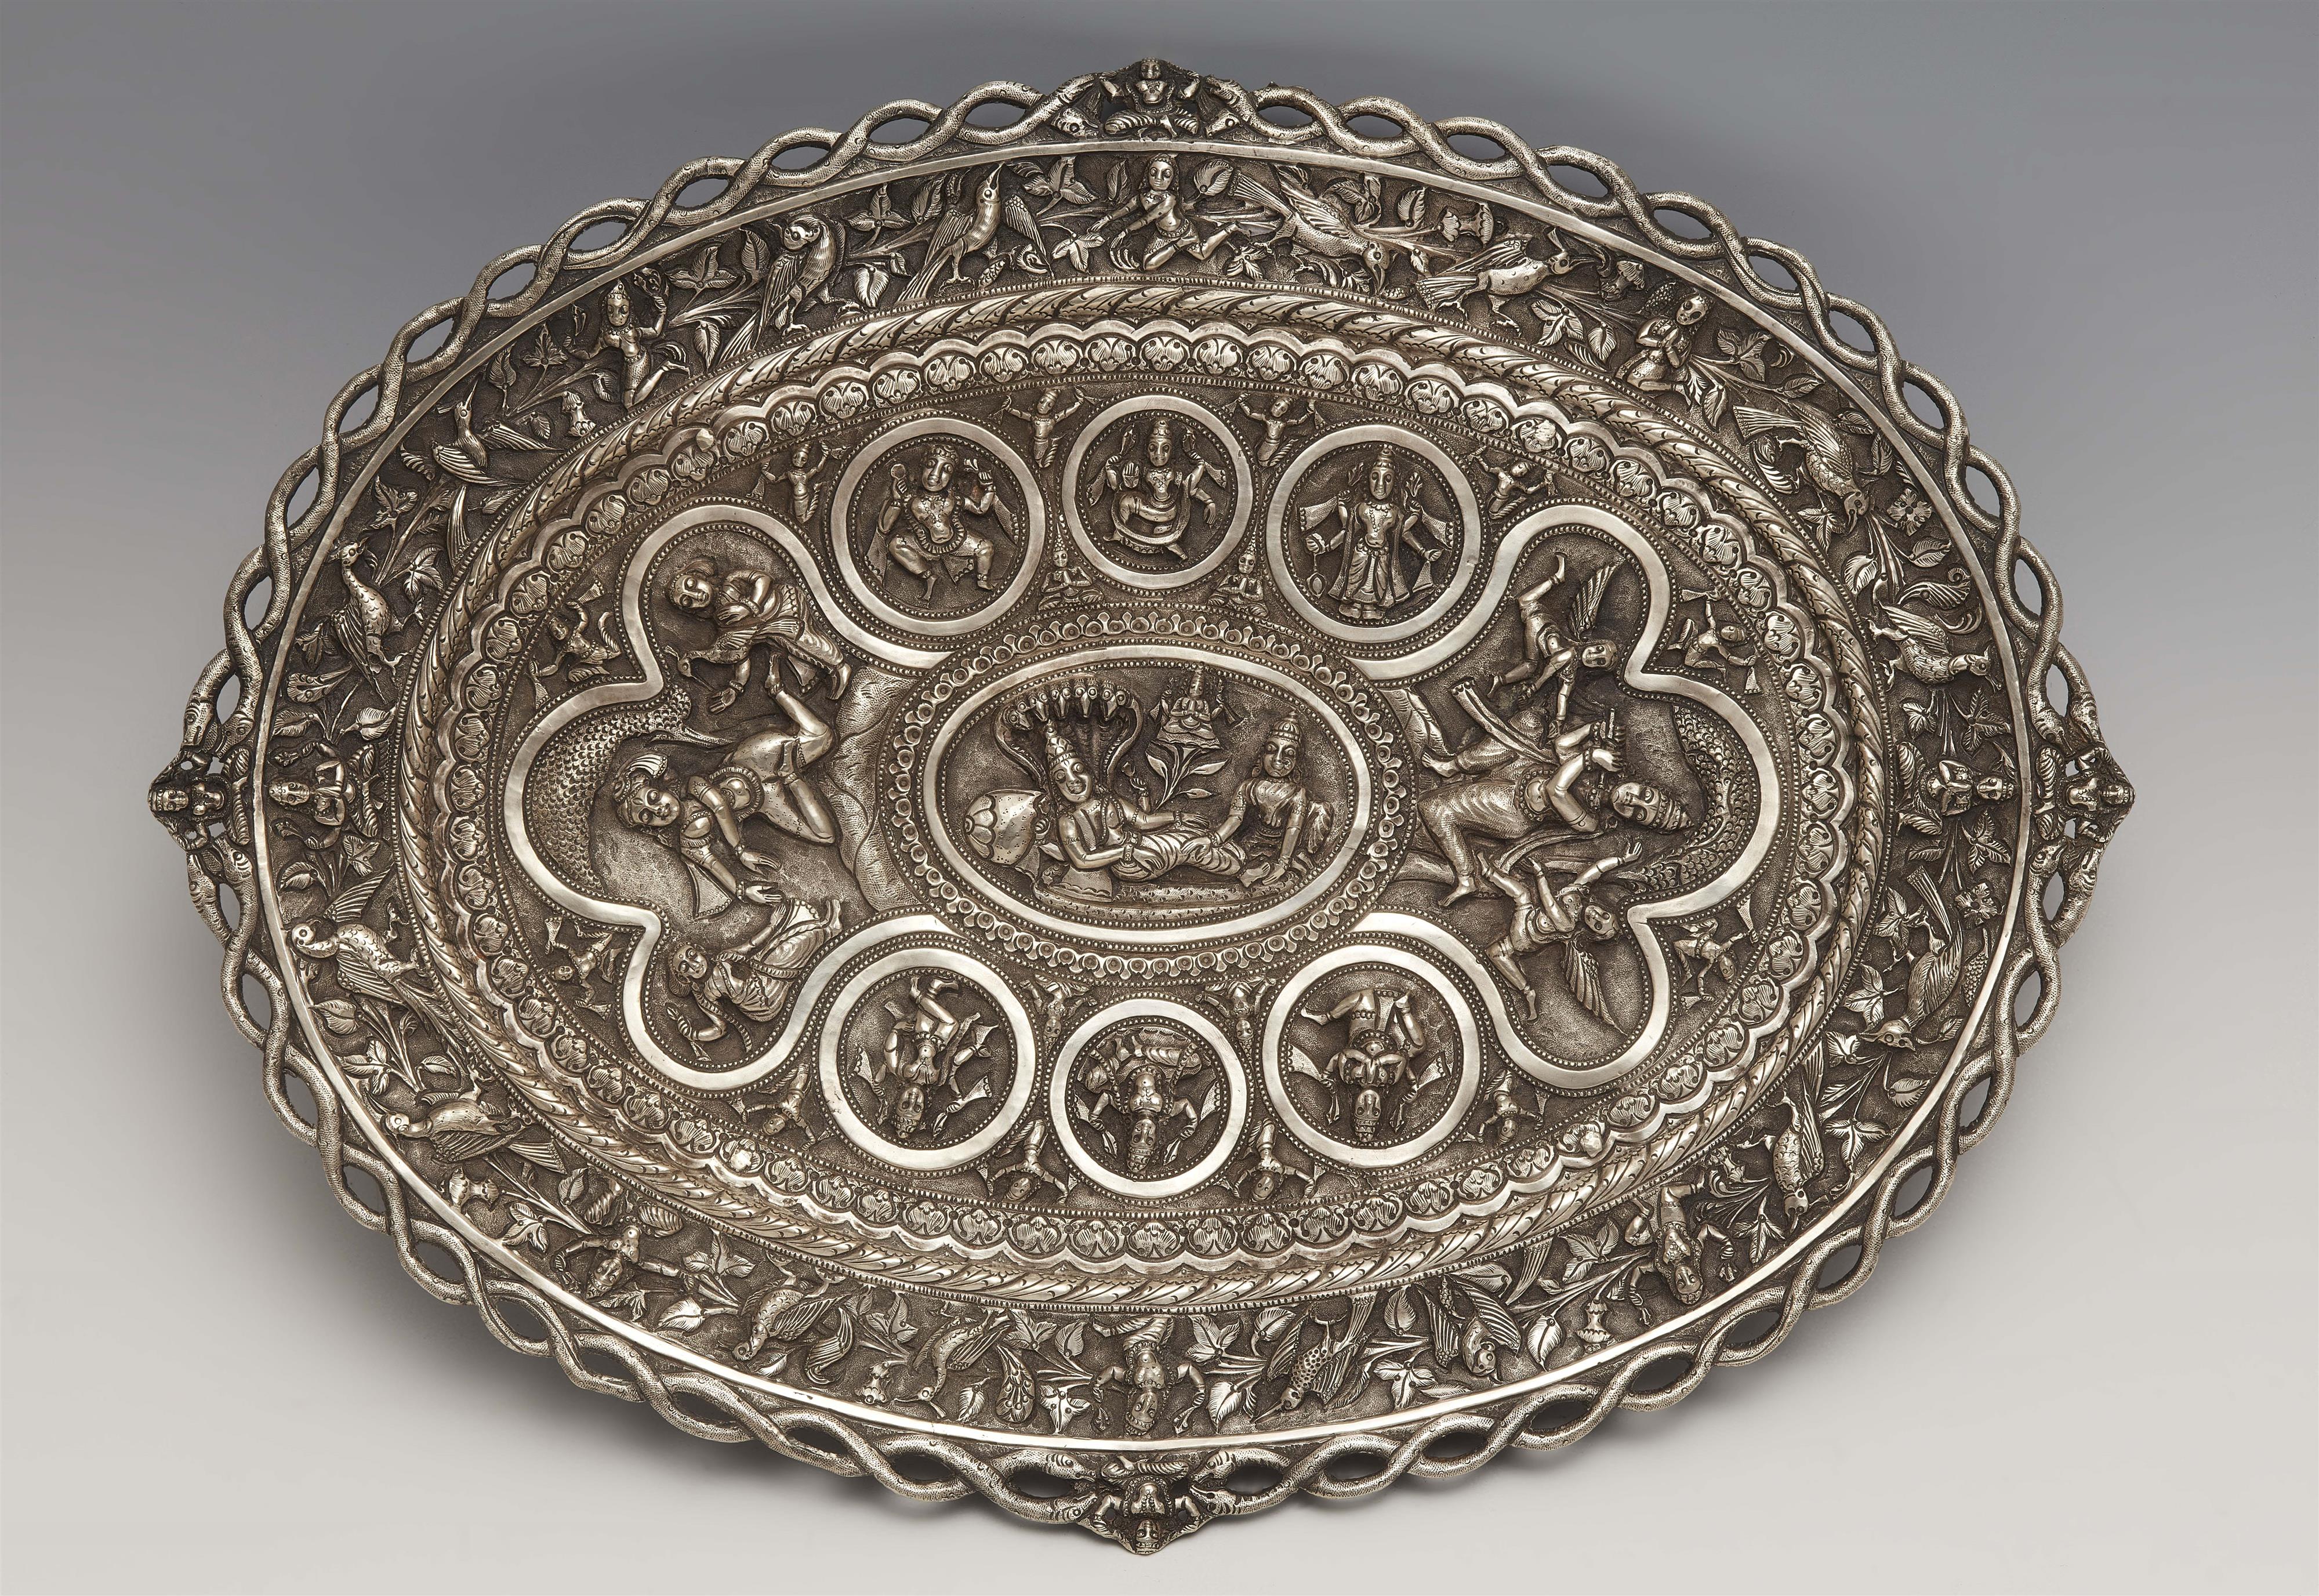 A Poona oval silver swami pattern footed tray. Late 19th century - image-1